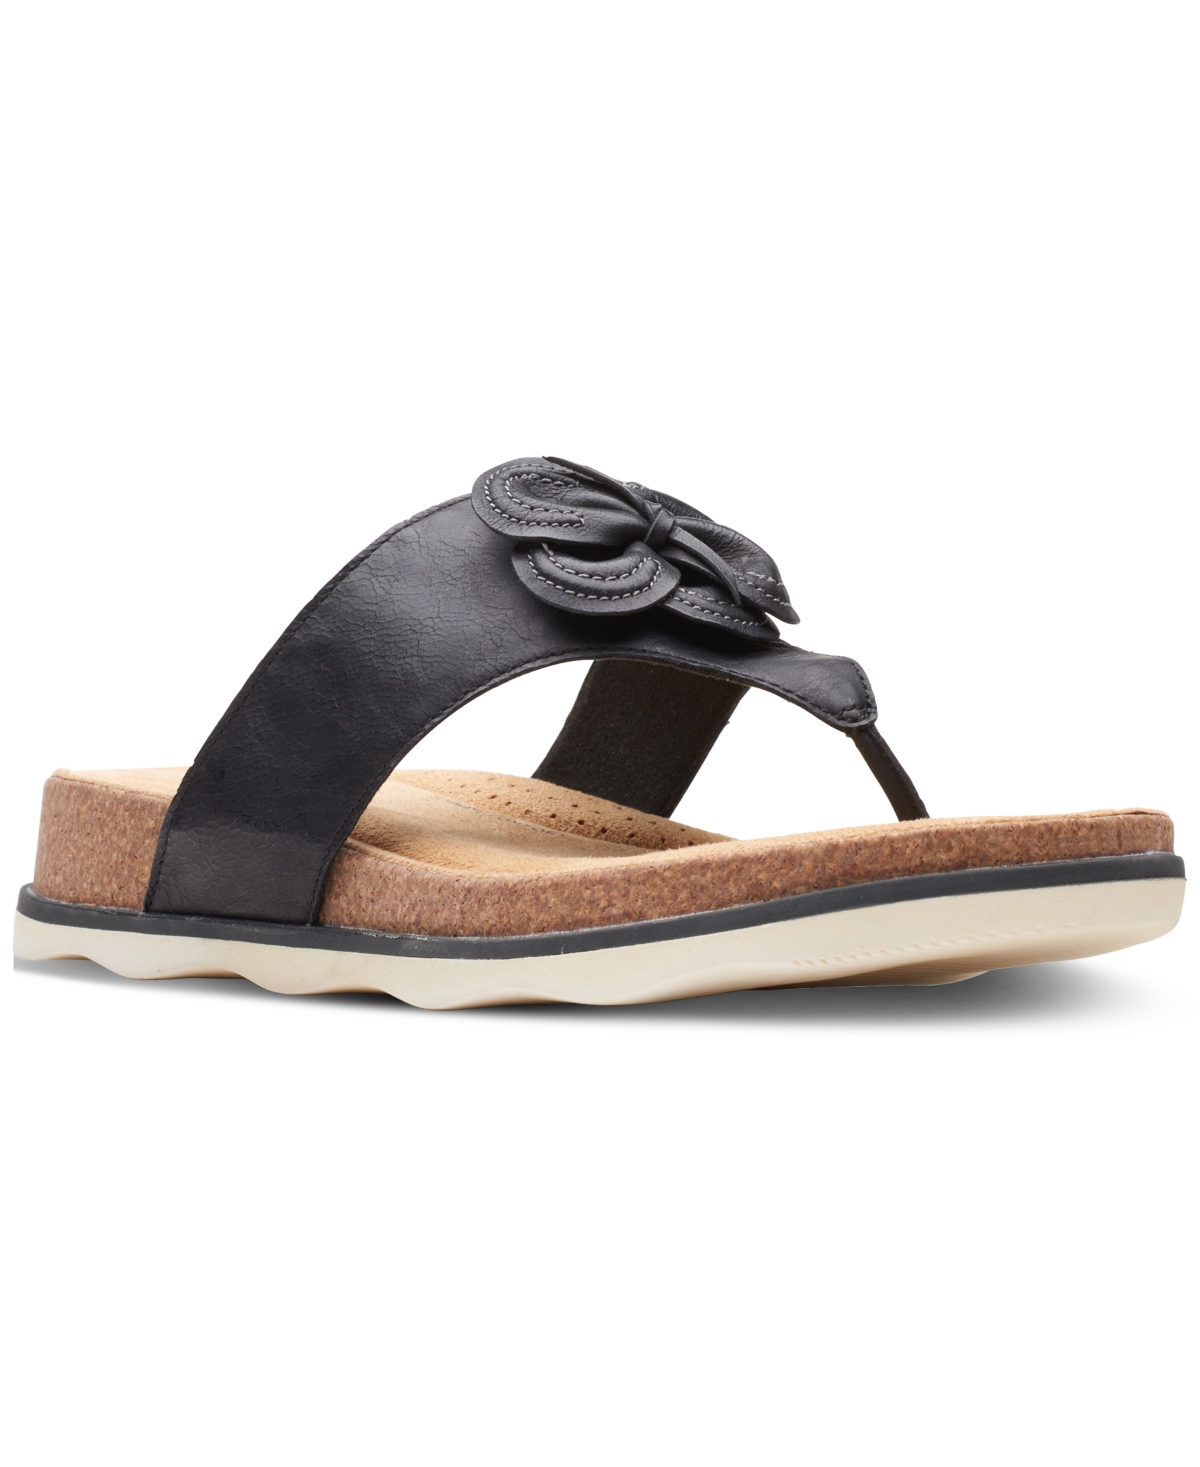 CLARKS WOMEN'S BRYNN STYLE EMBELLISHED THONG SANDALS WOMEN'S SHOES